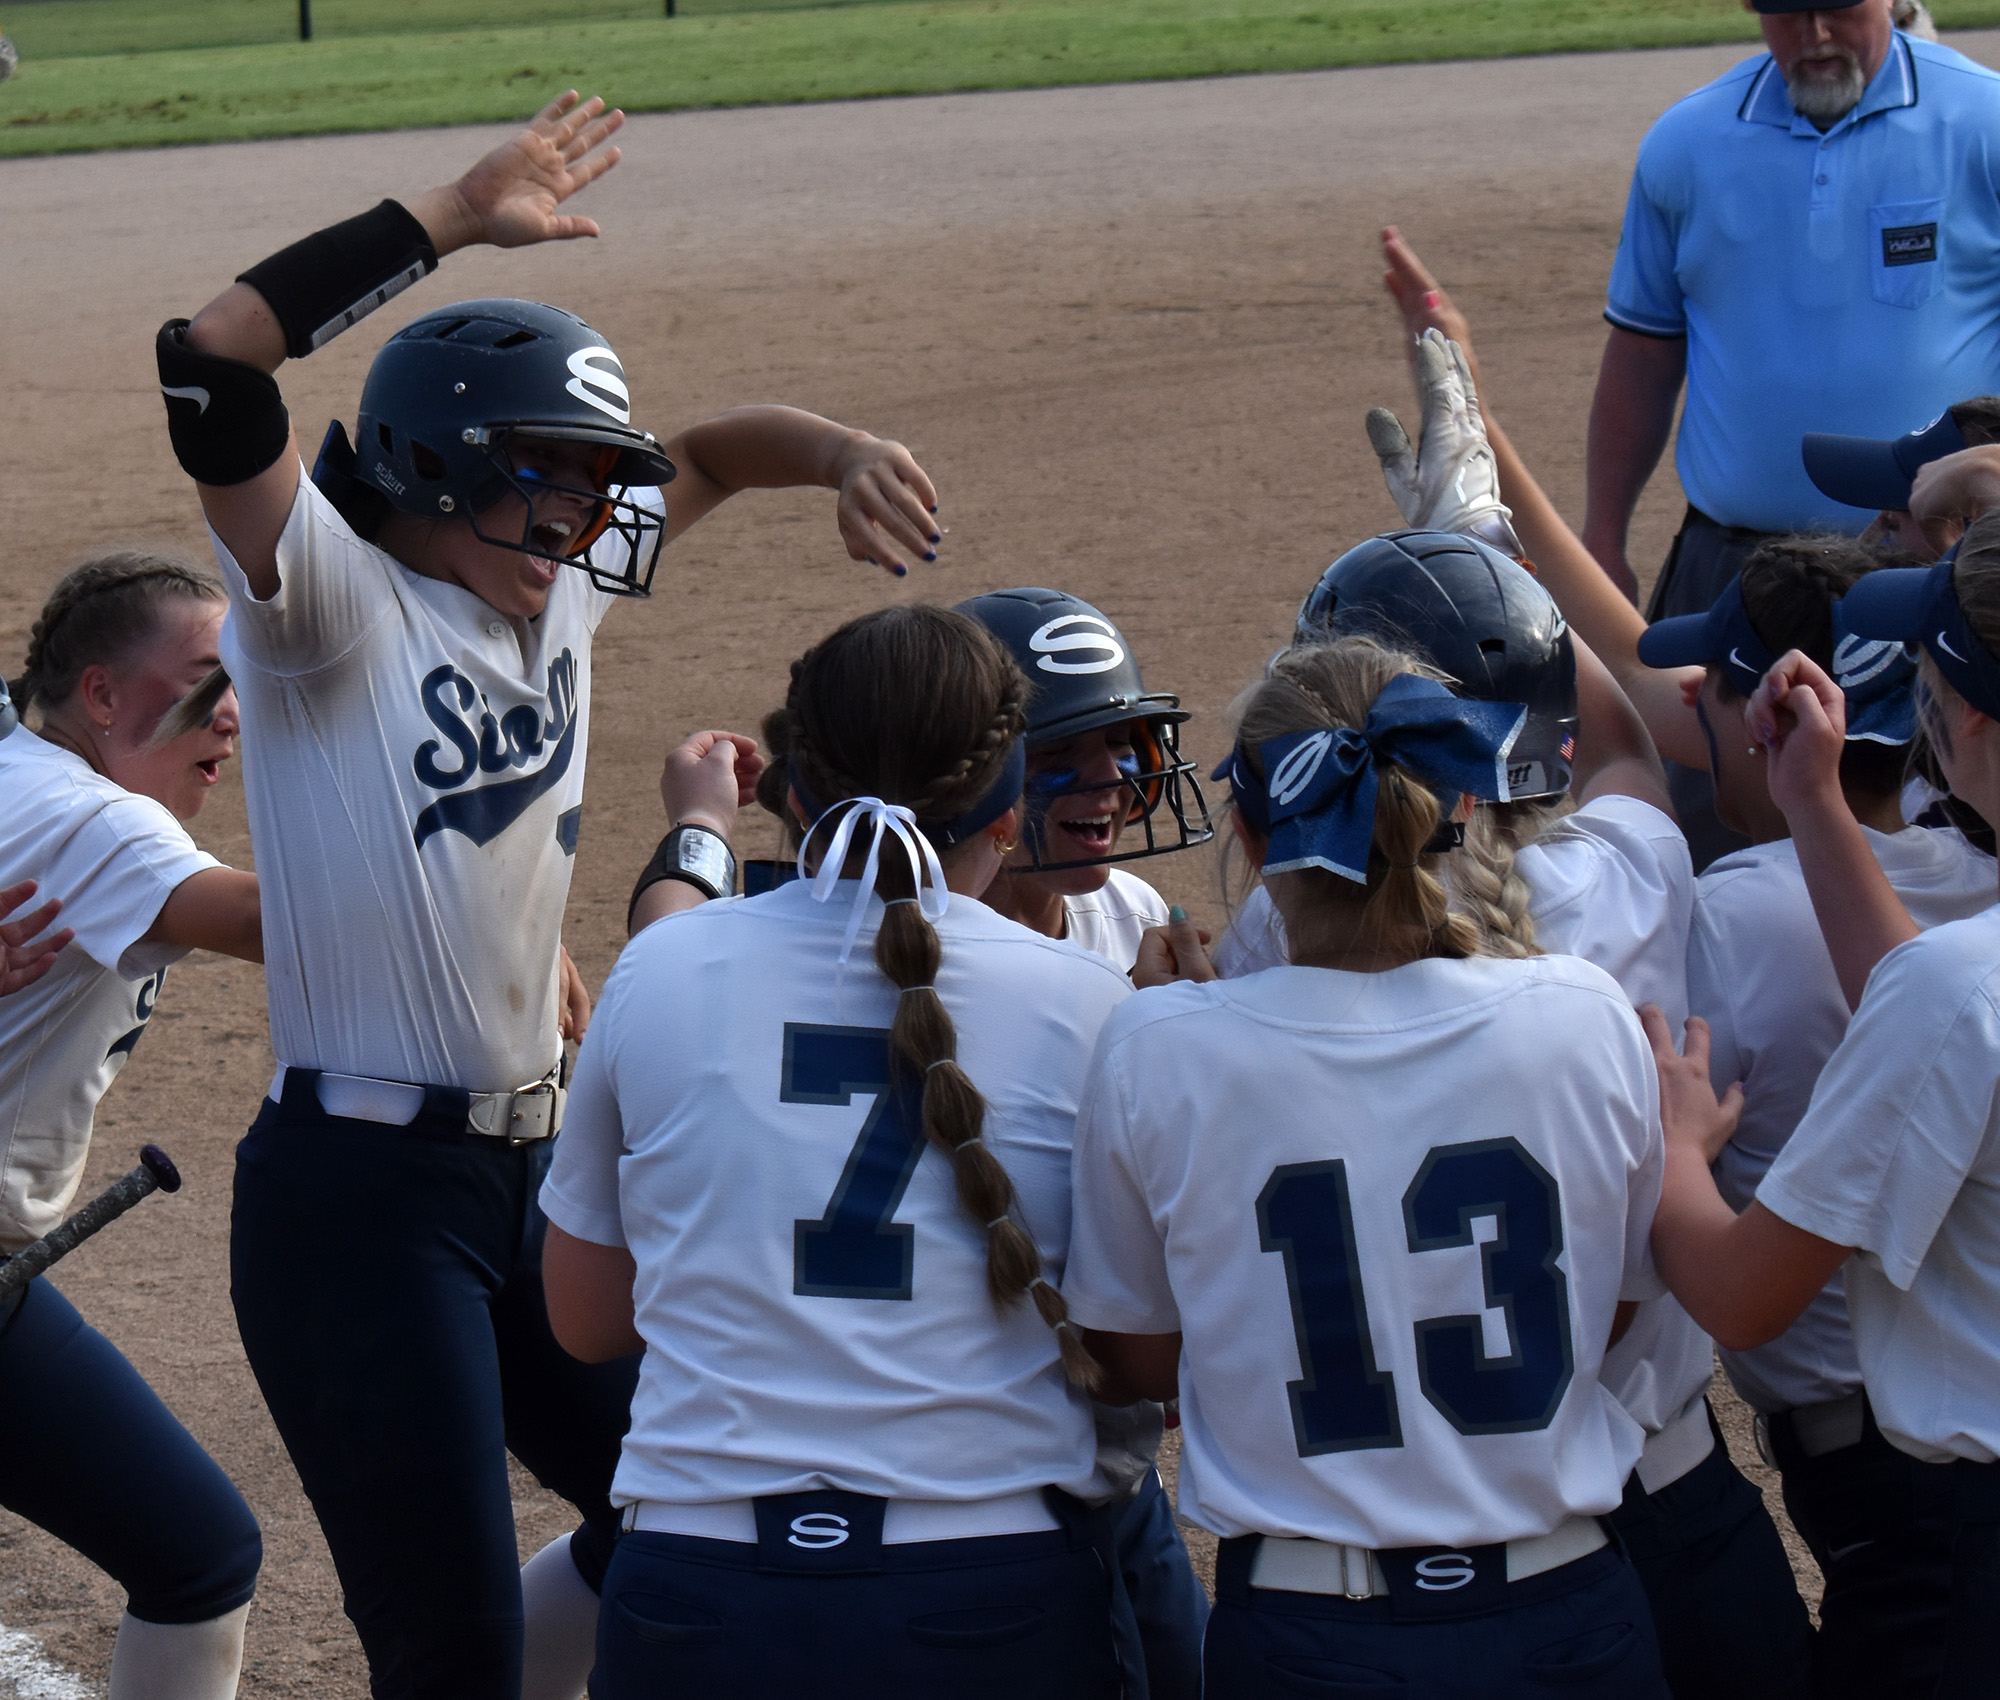 Kylie Lester (center) is greeted by her teammates after hitting a two-run home run for Skyview in an 8-4 win over Decatur in the quarterfinals Friday of the 4A bi-district softball tournament at Kent Service Fields in Kent on Friday, May 19, 2023.